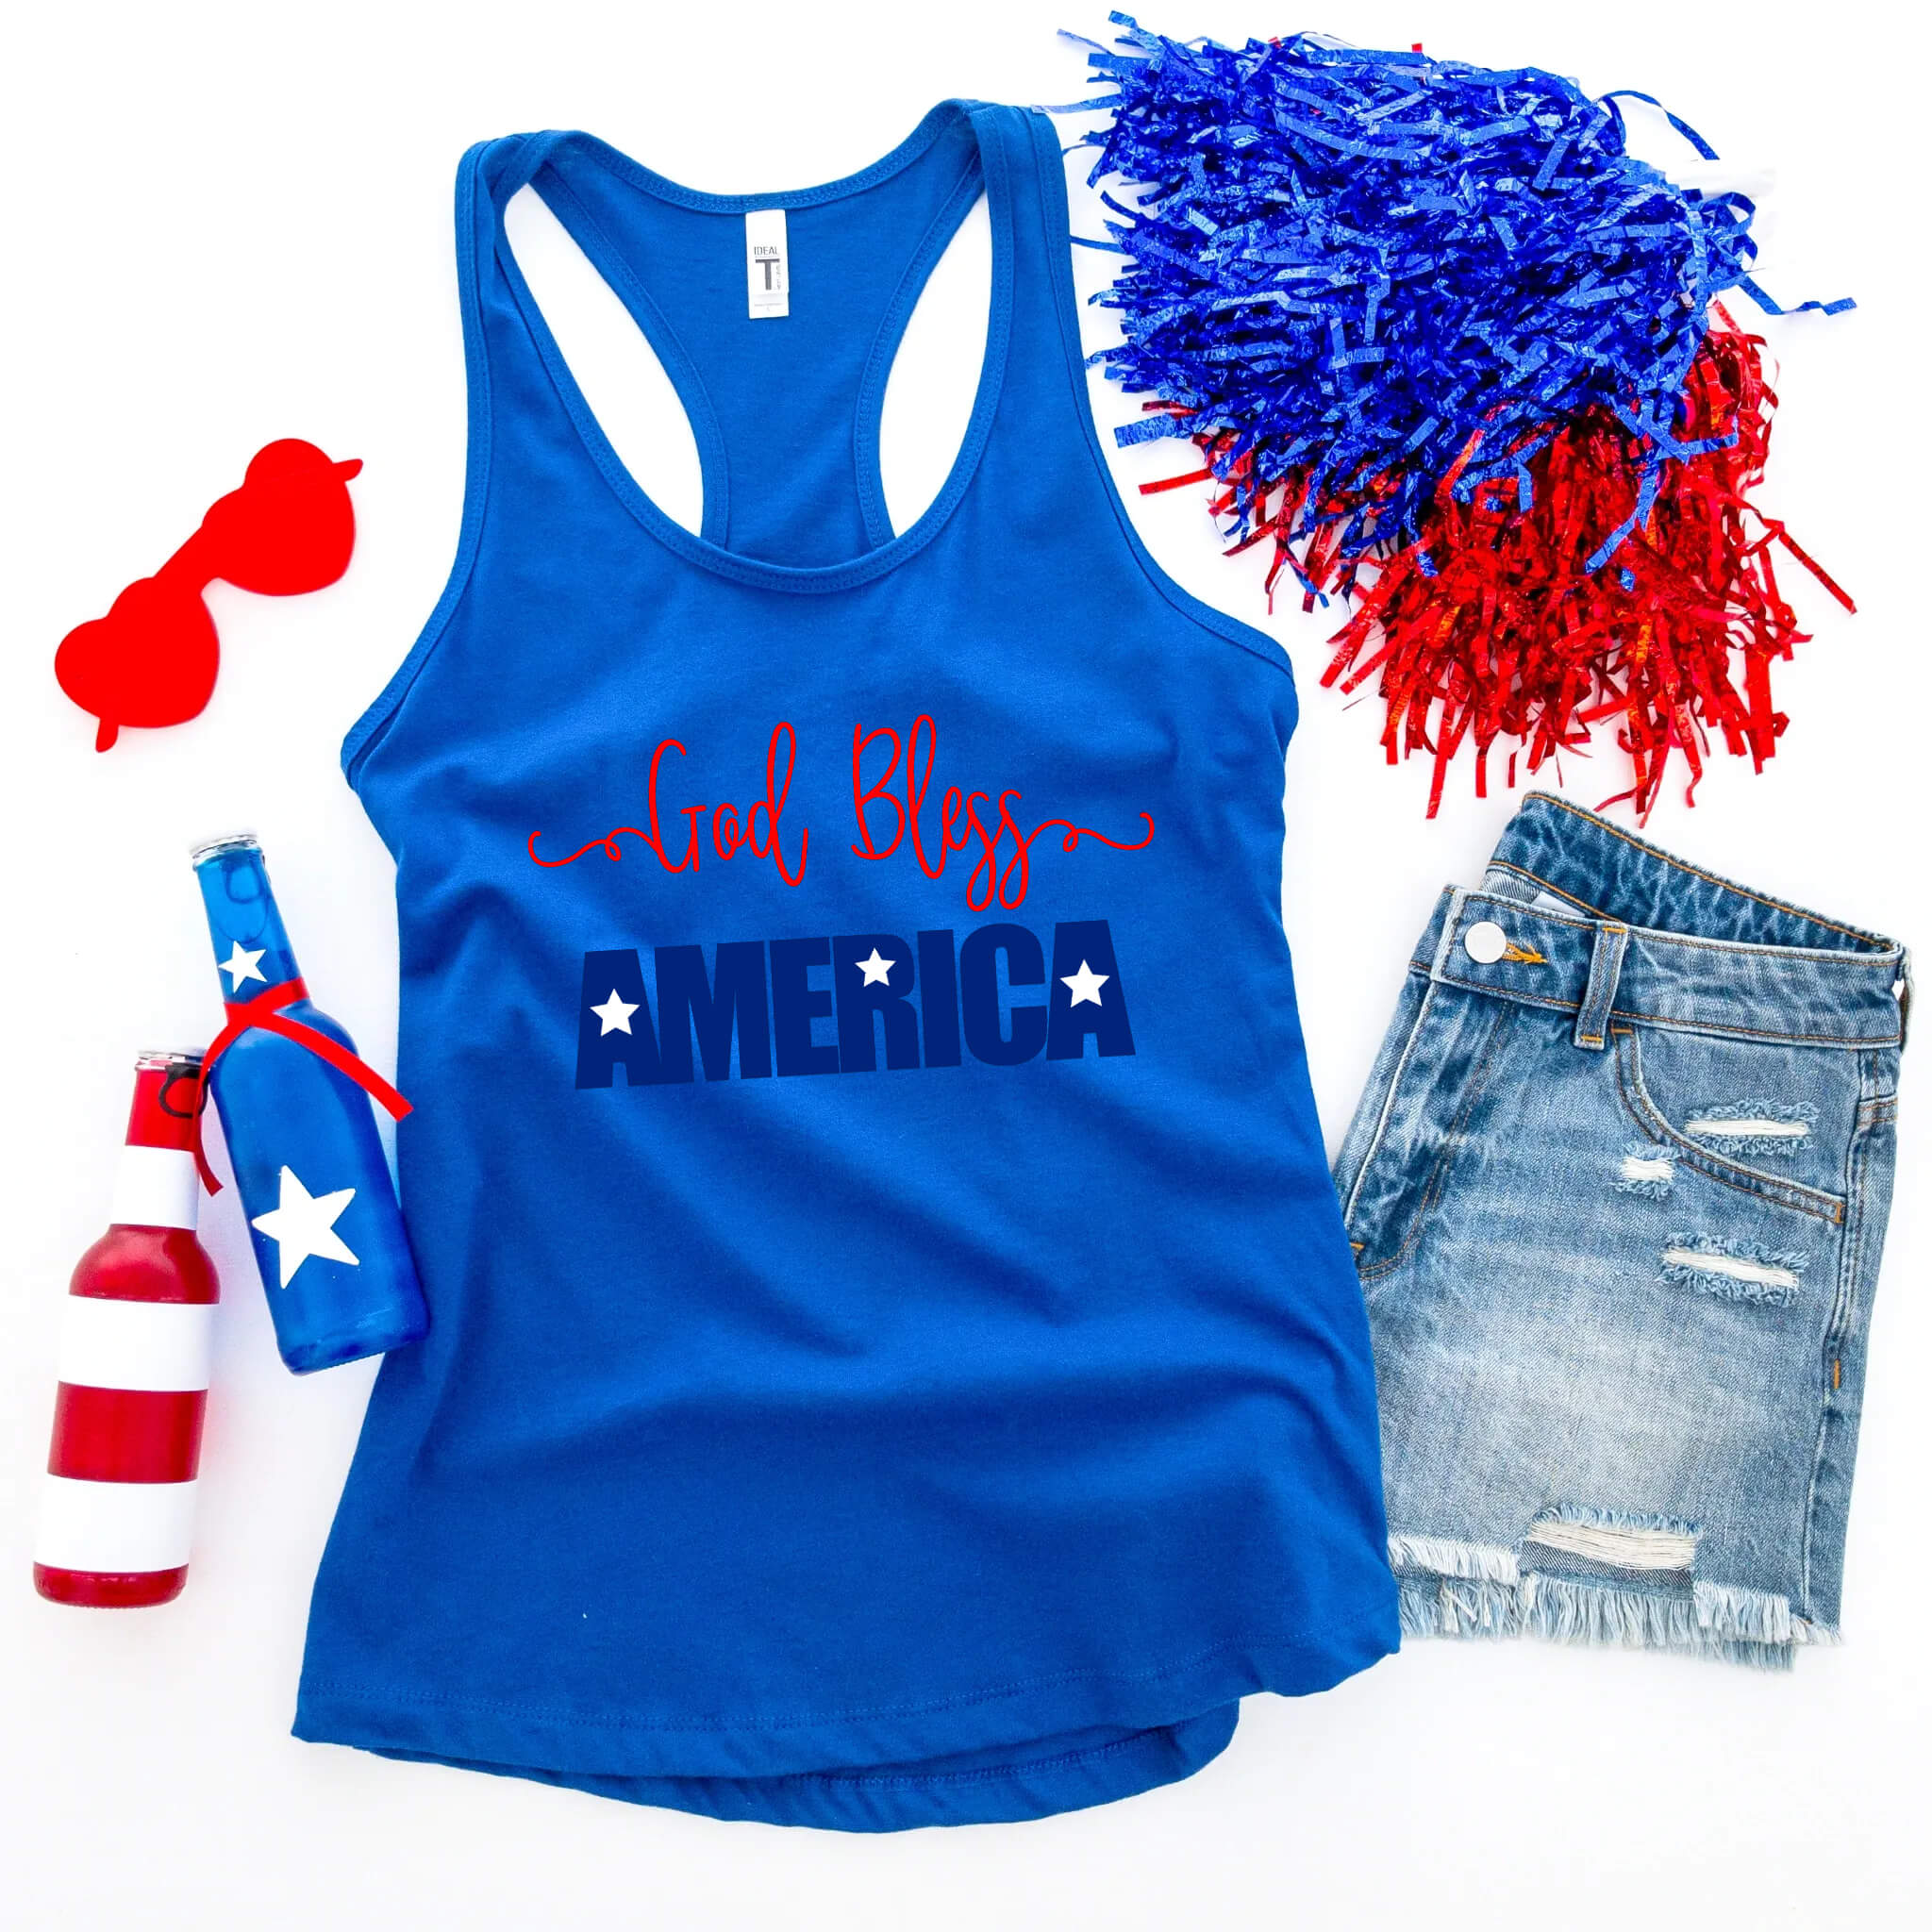 4th of July - God Bless America Patriotic Women’s Graphic Print T-Shirt / Tank Top